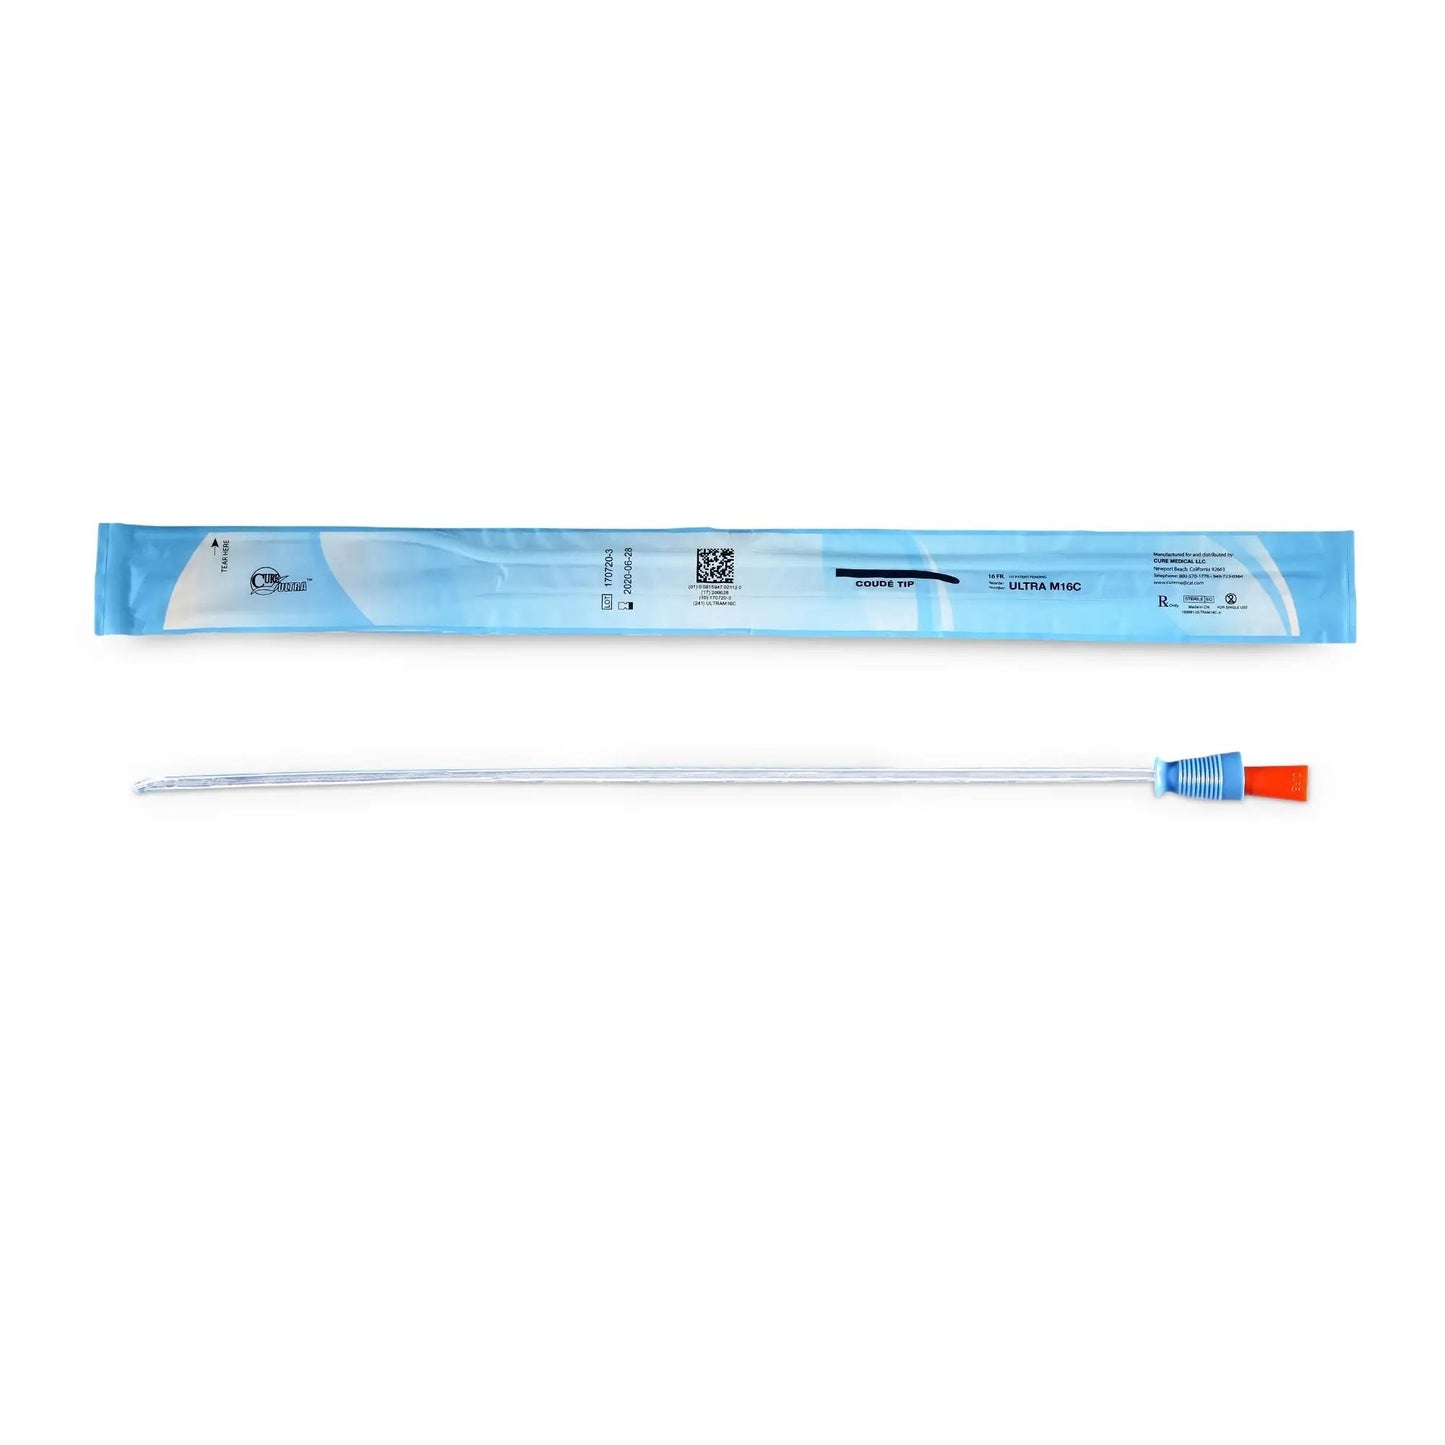 Cure Ultra Urethral Catheter, 16 Fr., Male, Coude